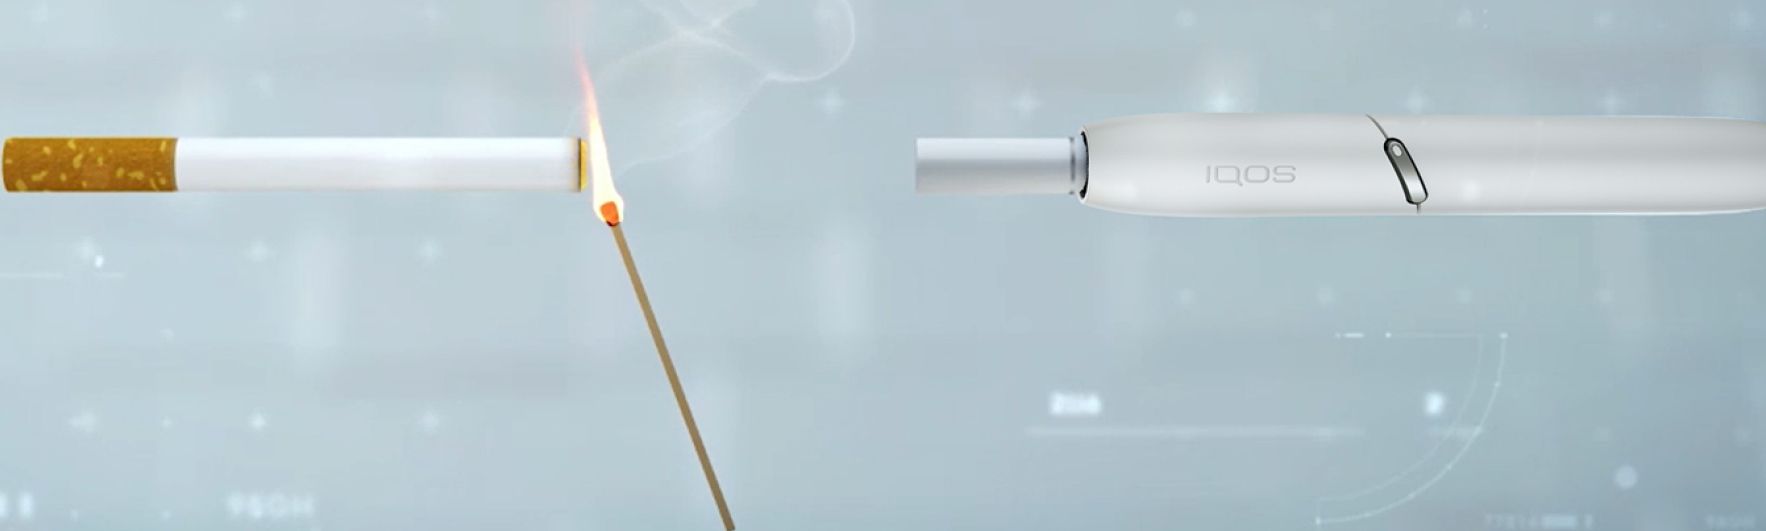 IQOS vs. Cigarettes: What’s the Difference?